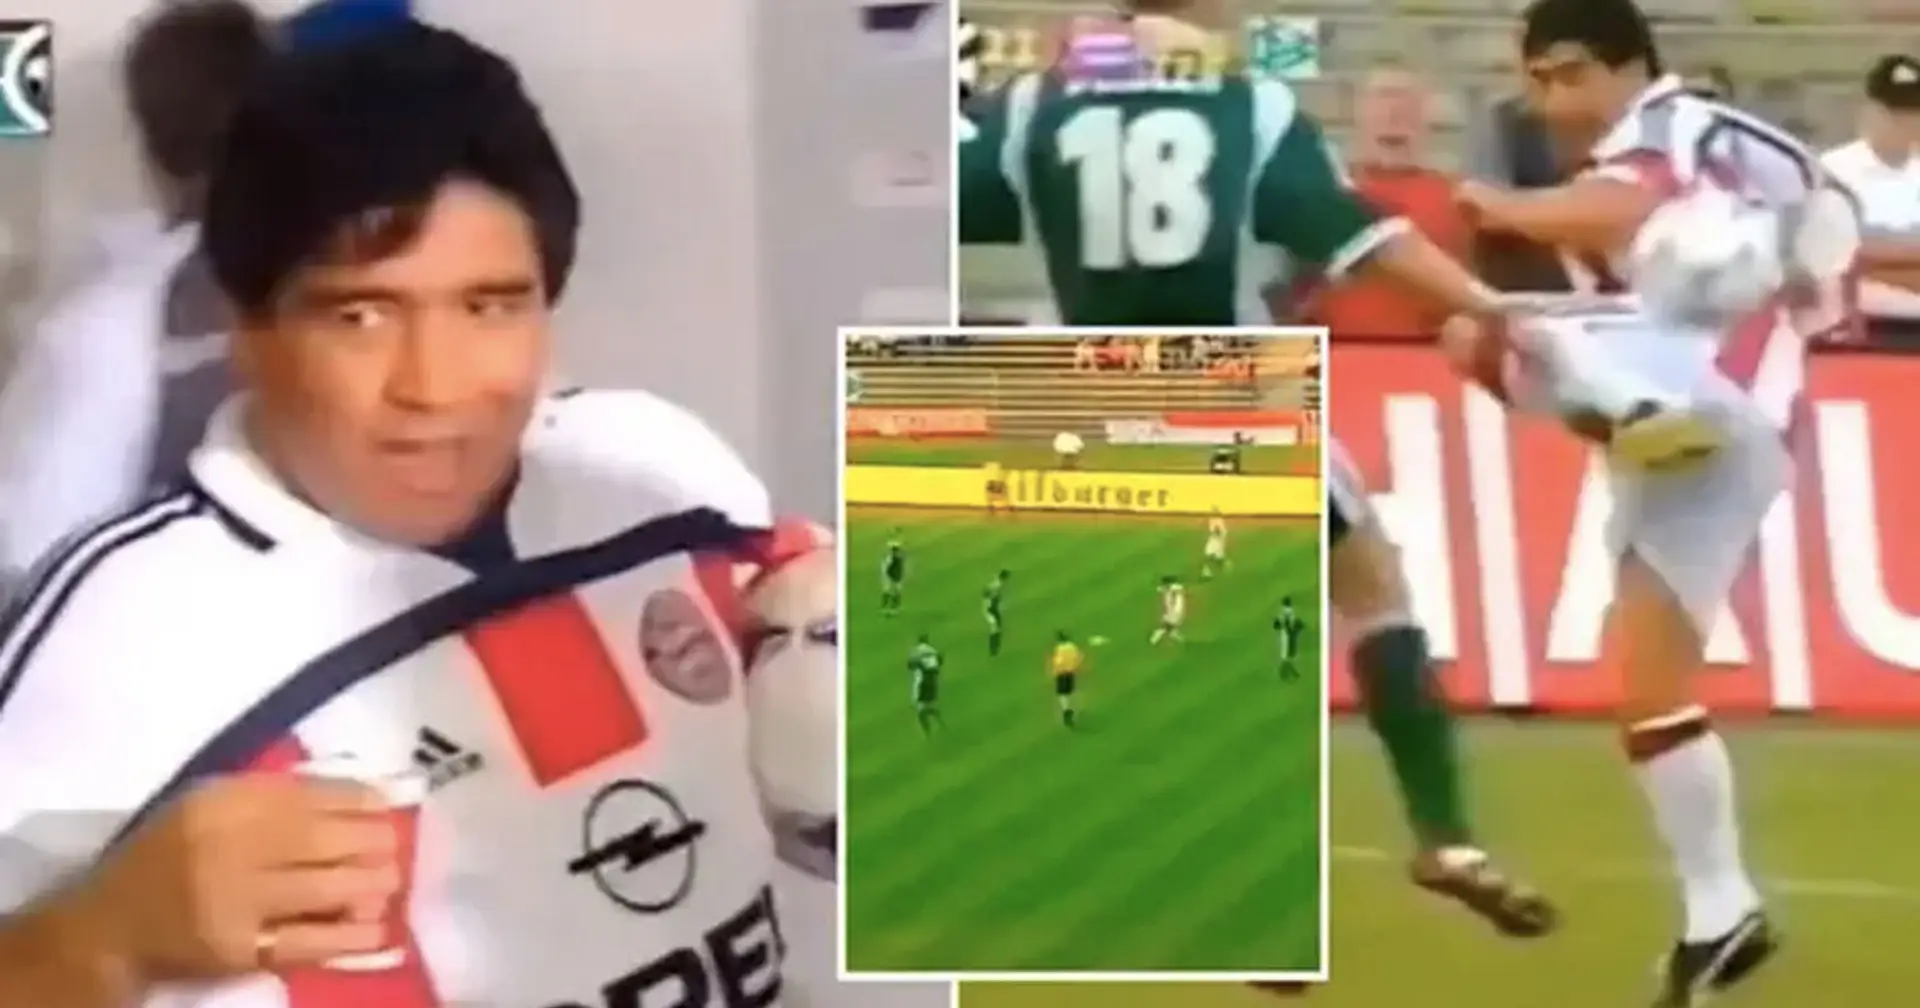 Maradona once played for Bayern and even captained them: here is how it happened